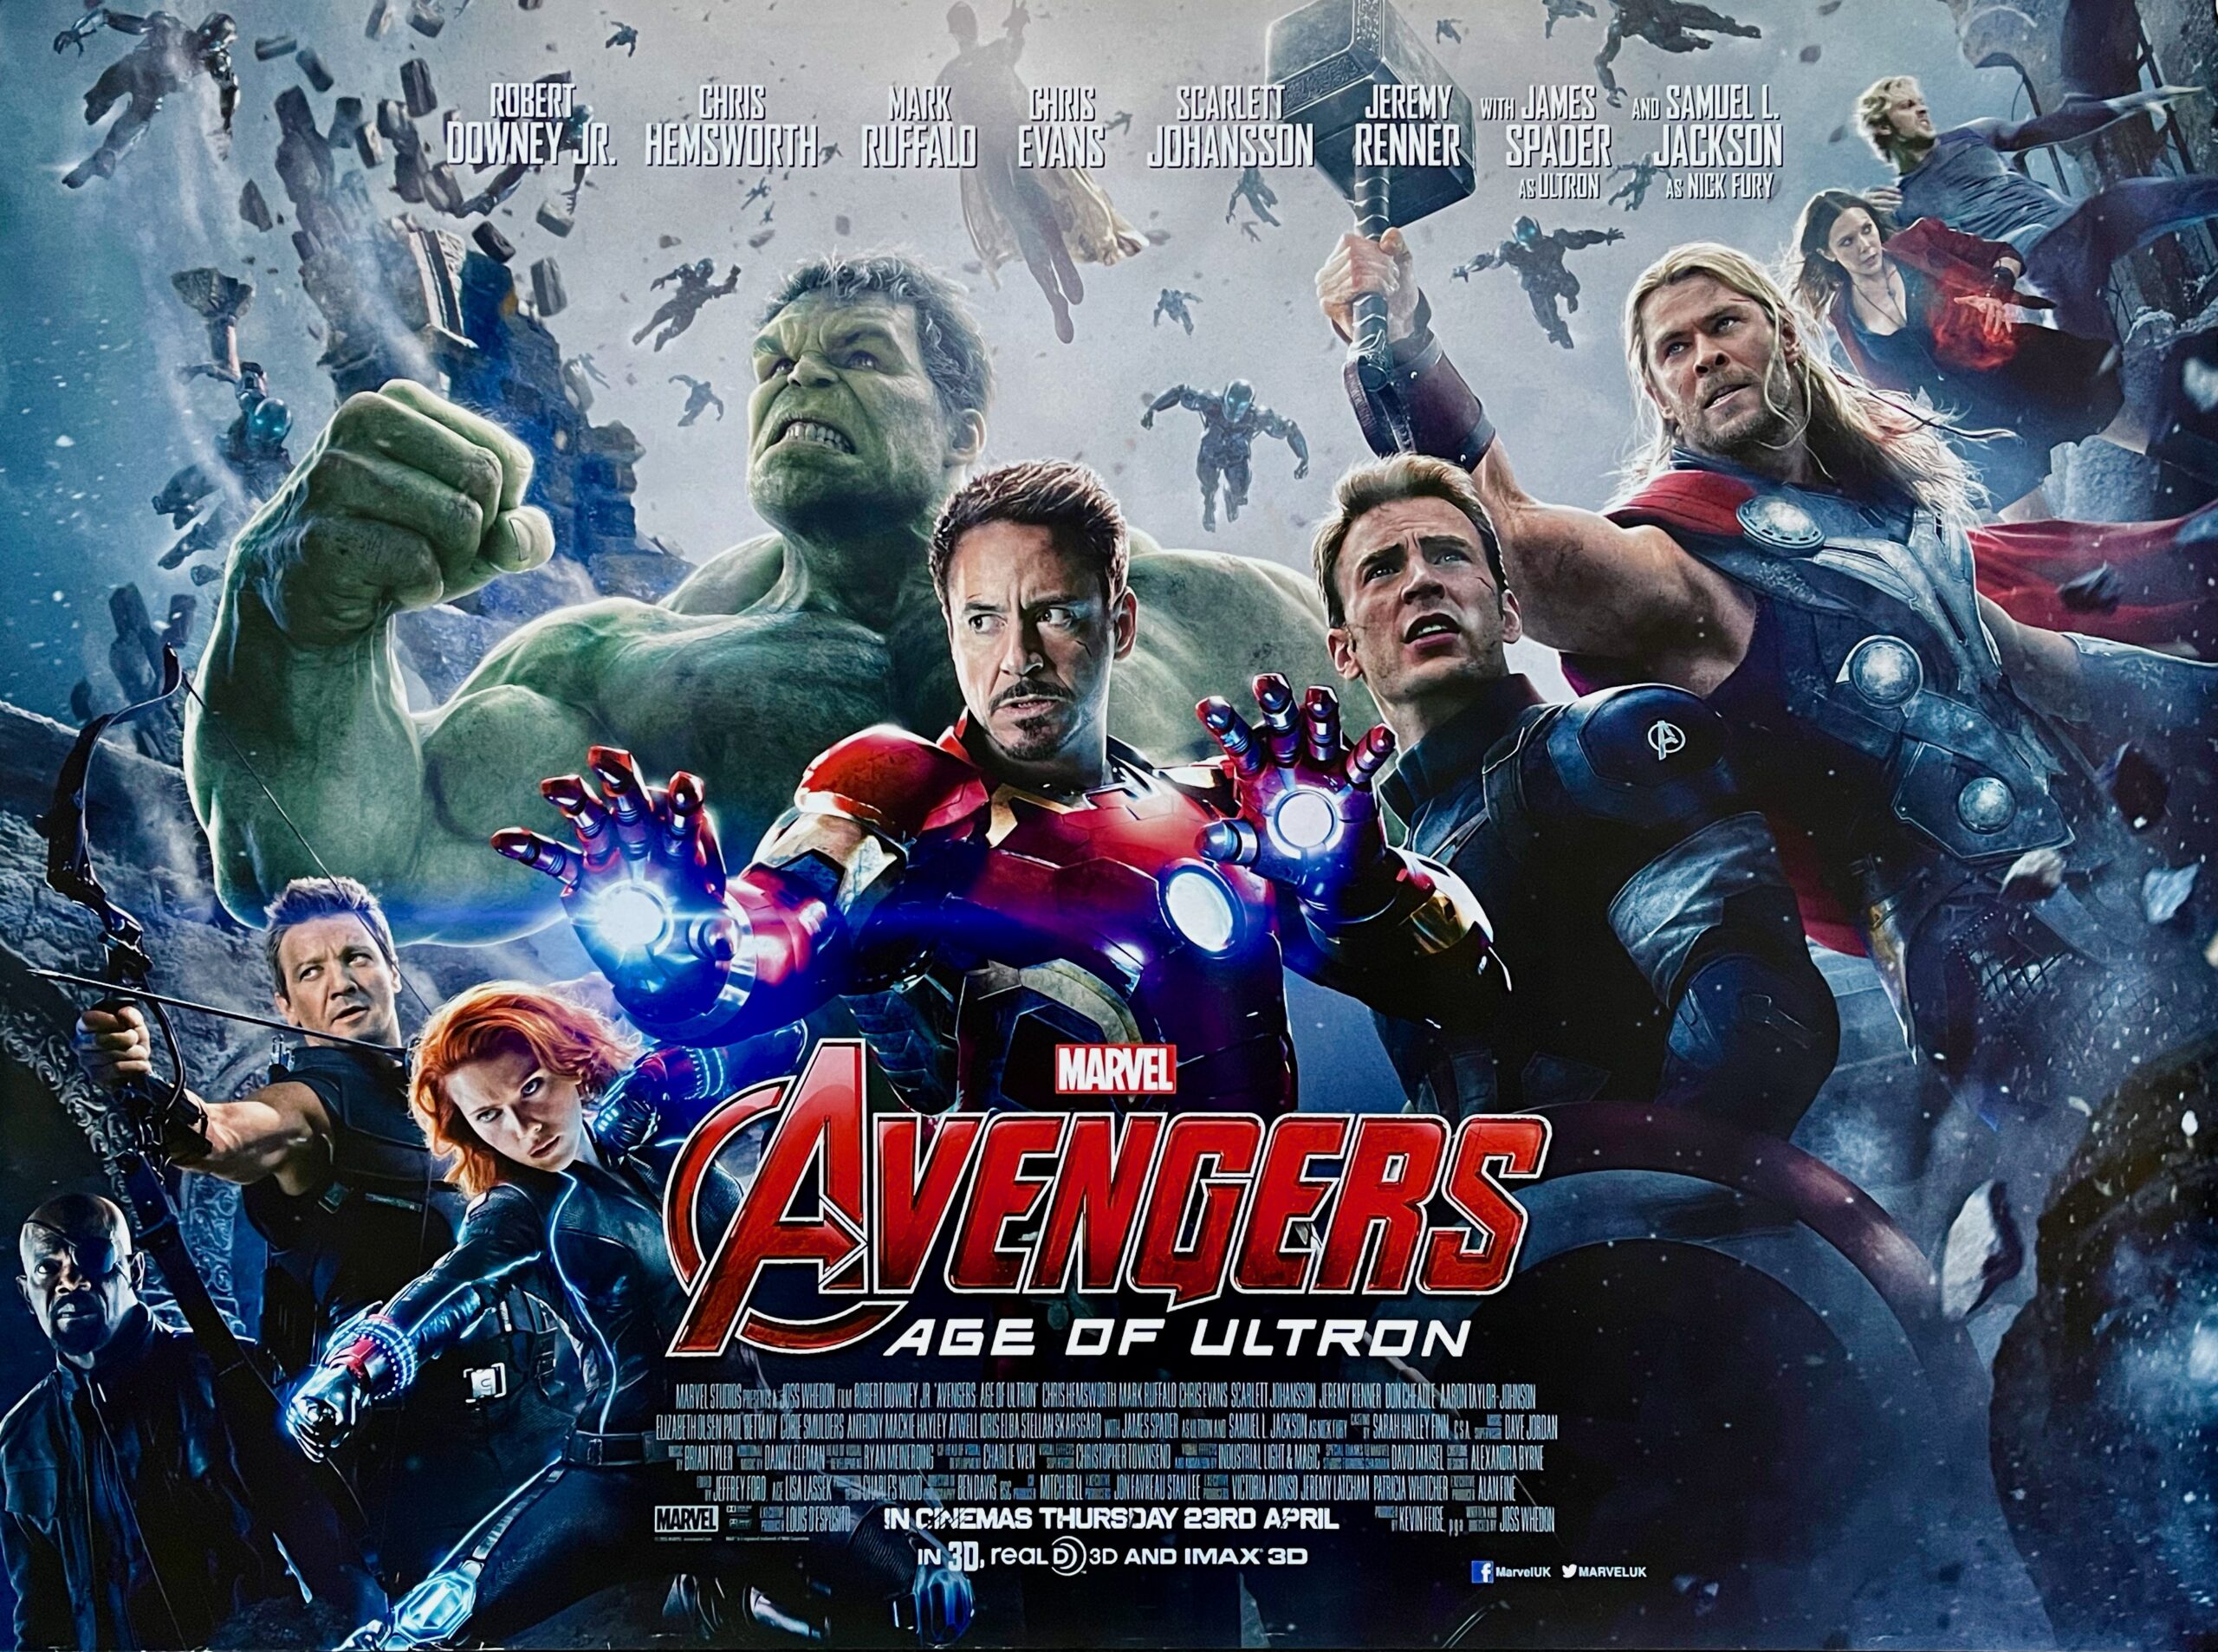 Avengers age of ultron full movie download in hindi